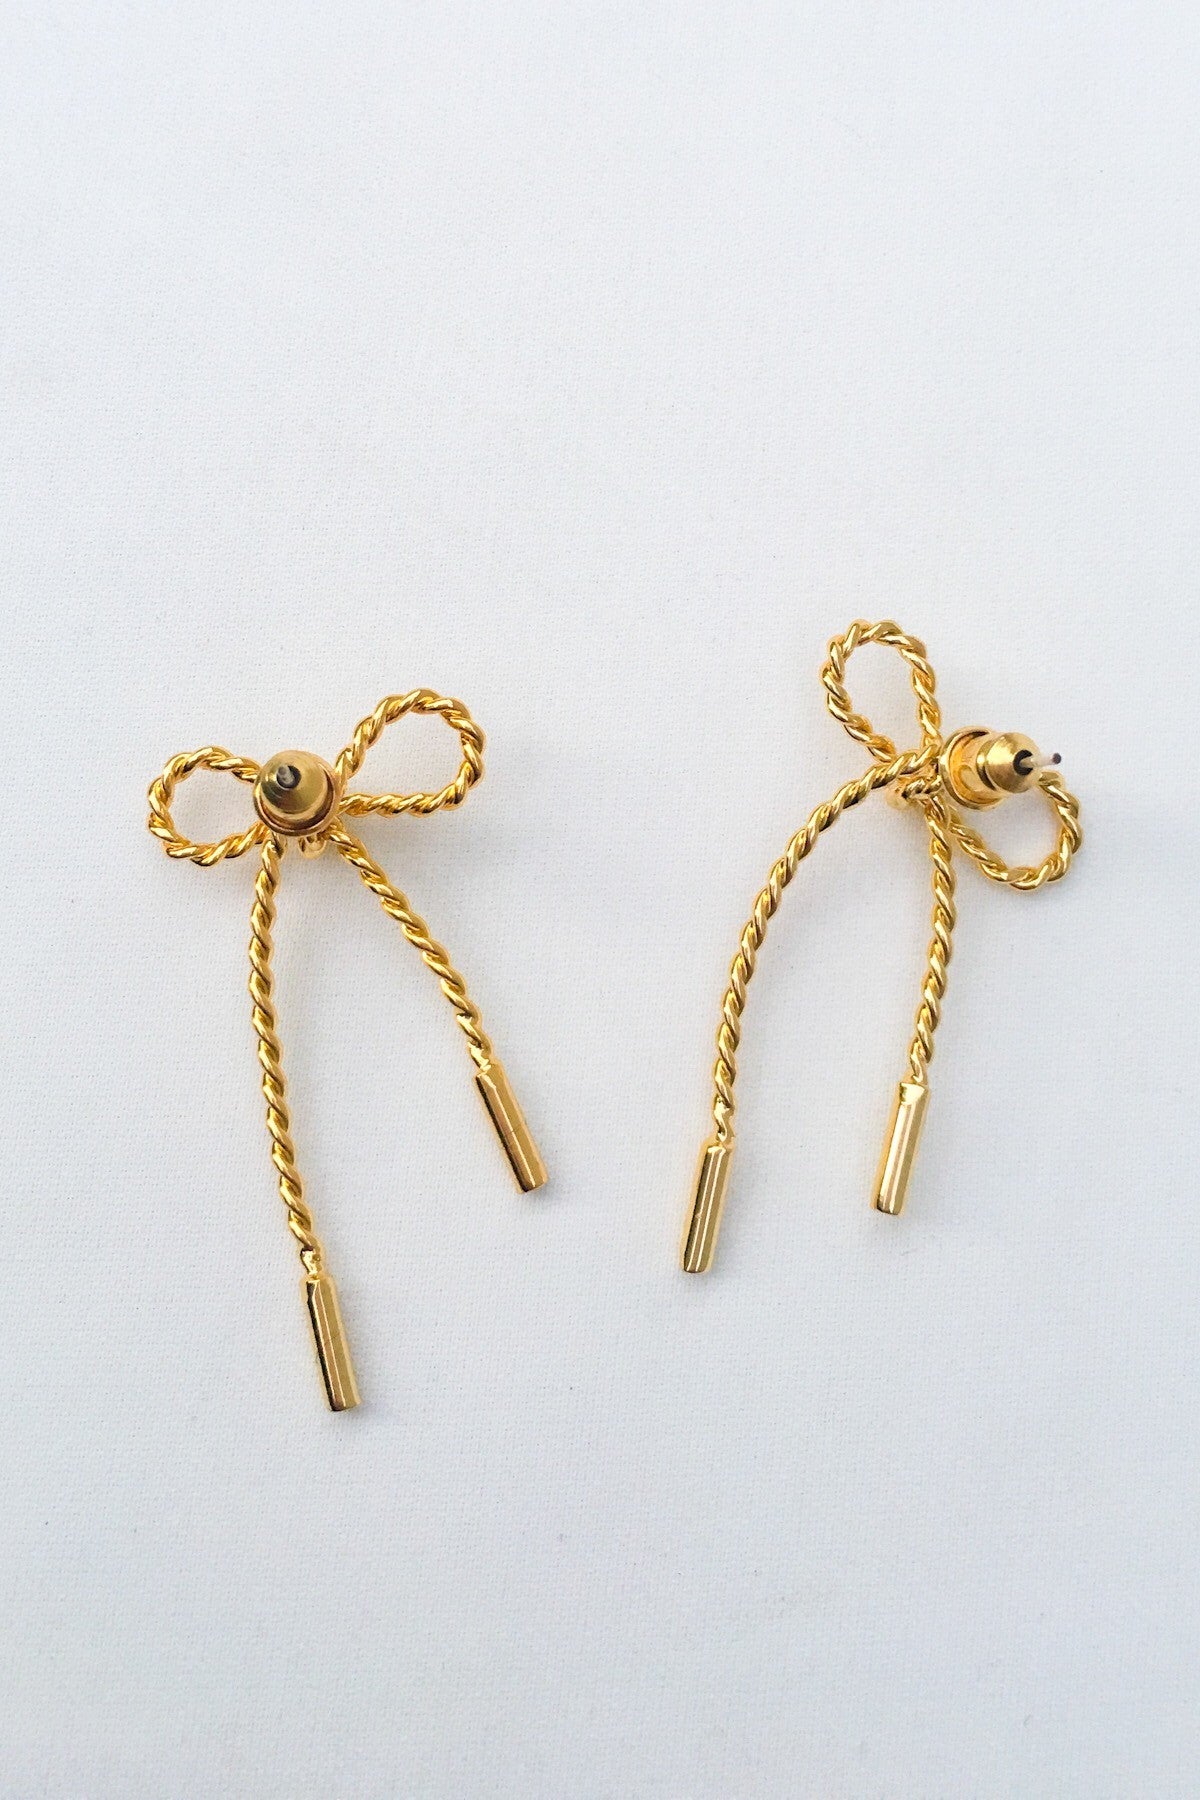 SKYE San Francisco SF California shop ethical sustainable modern minimalist quality women jewelry Luis 18K Gold Bow Earrings 2